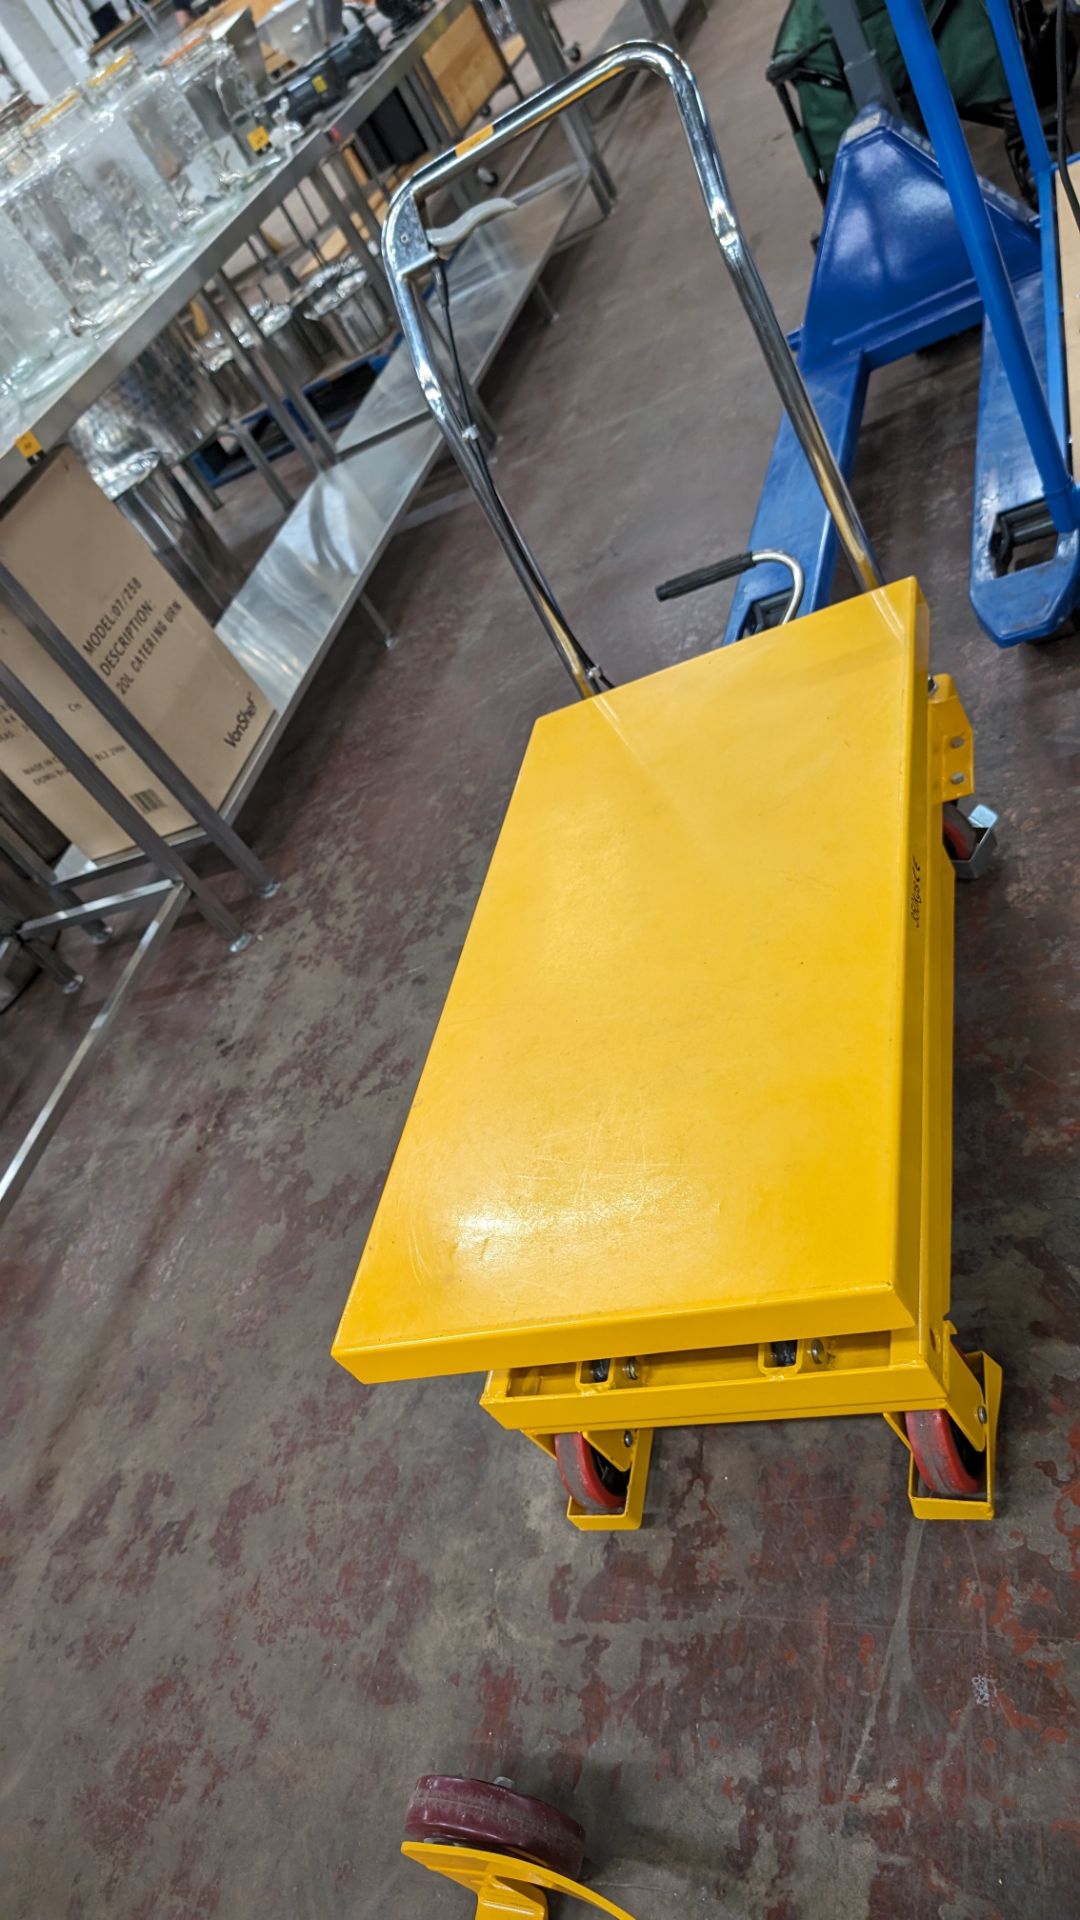 Mobile manual lifting table - Image 6 of 6